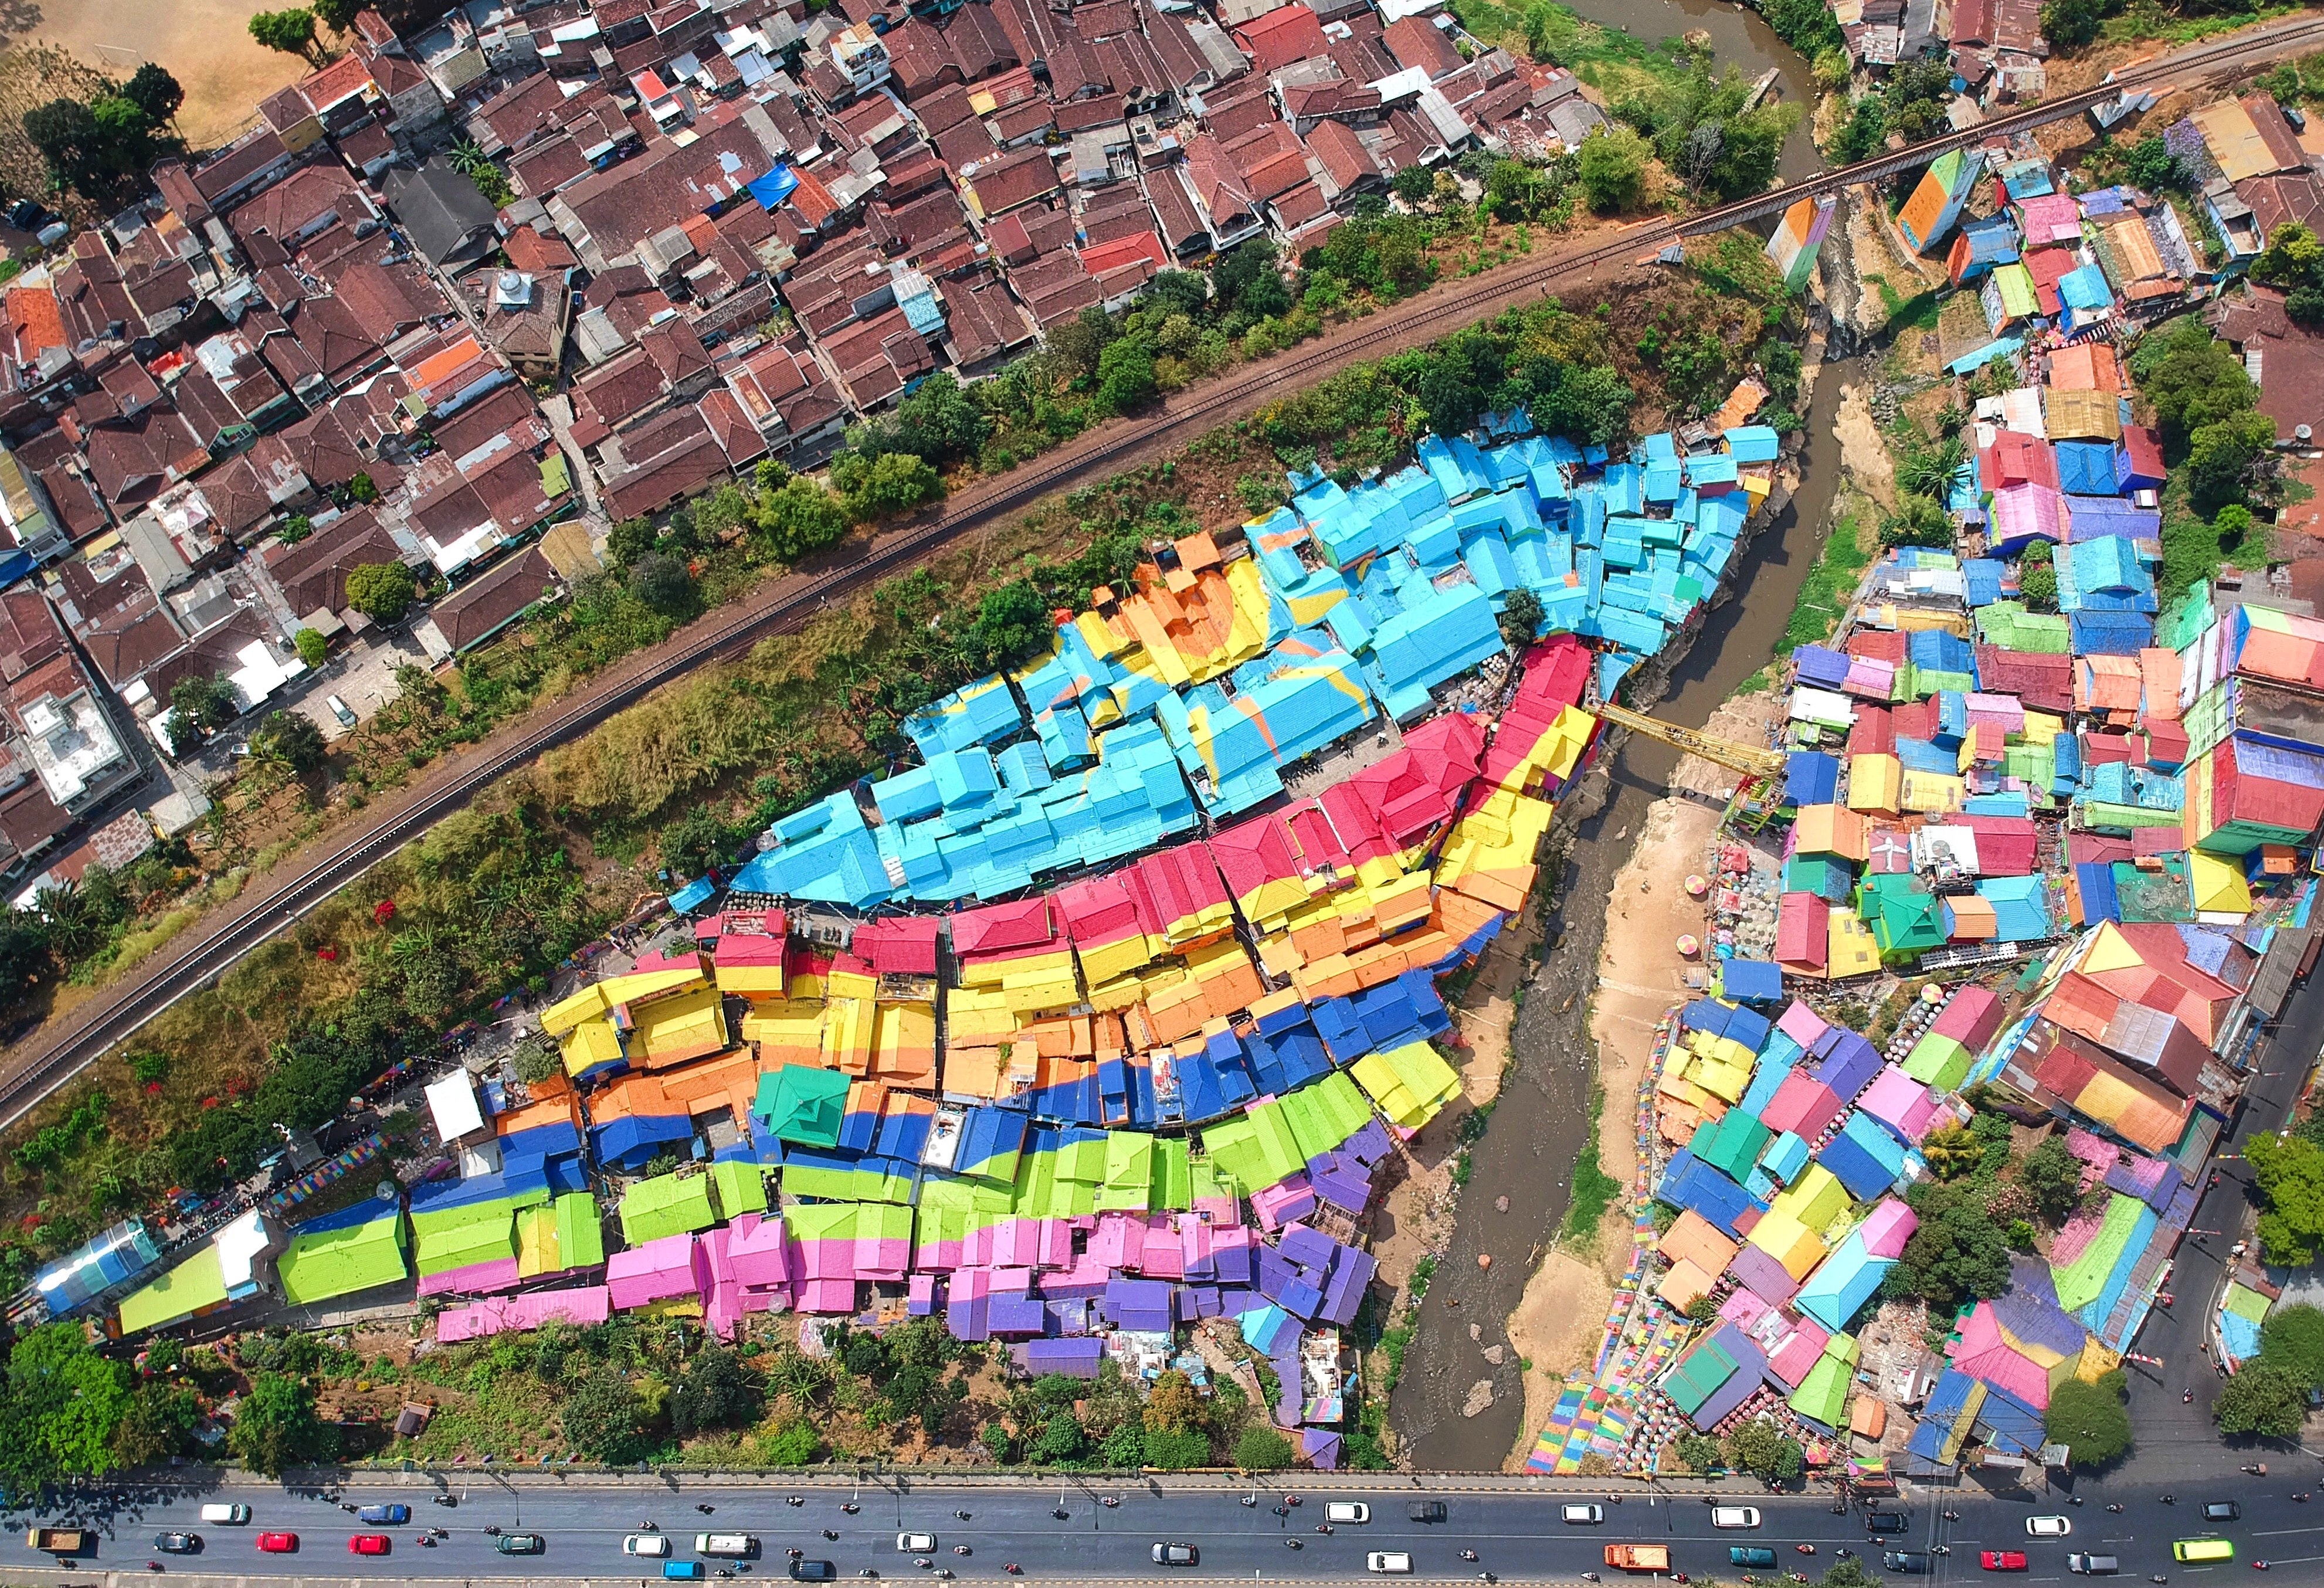 Above The Colorful Village